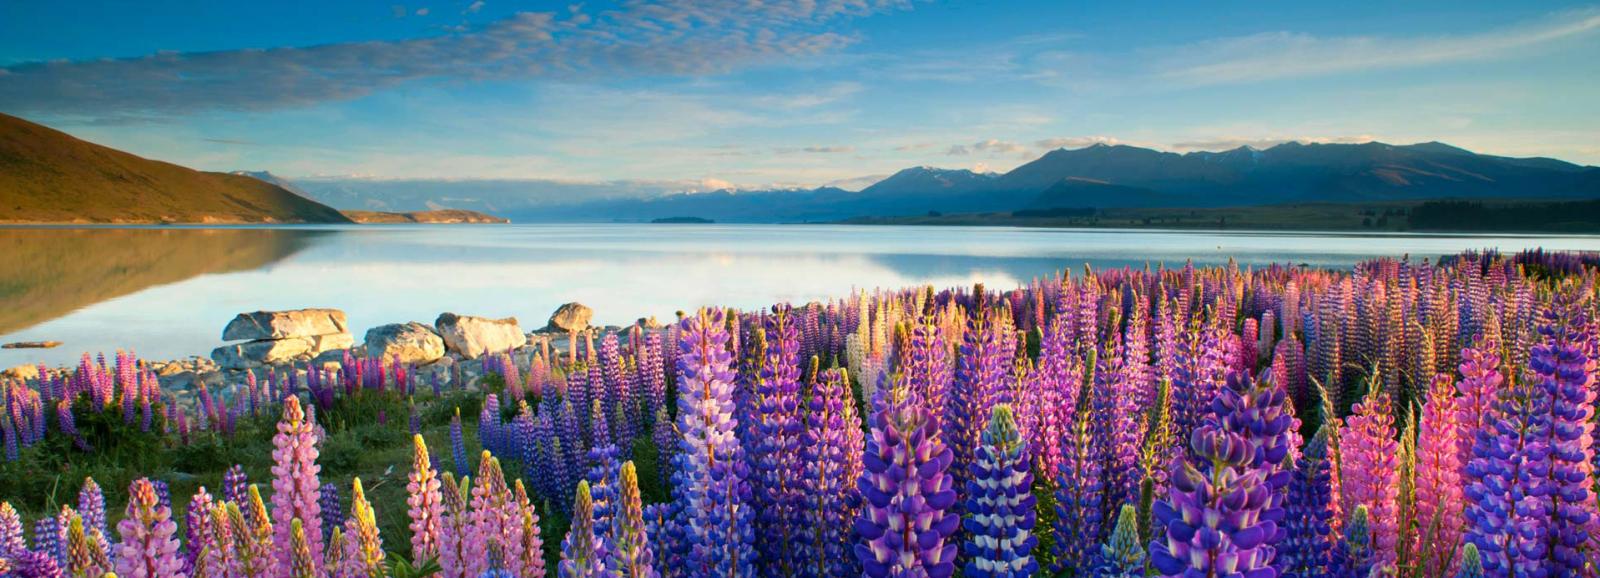 Panoramic view of Lake Tekapo in the South Islands high country.